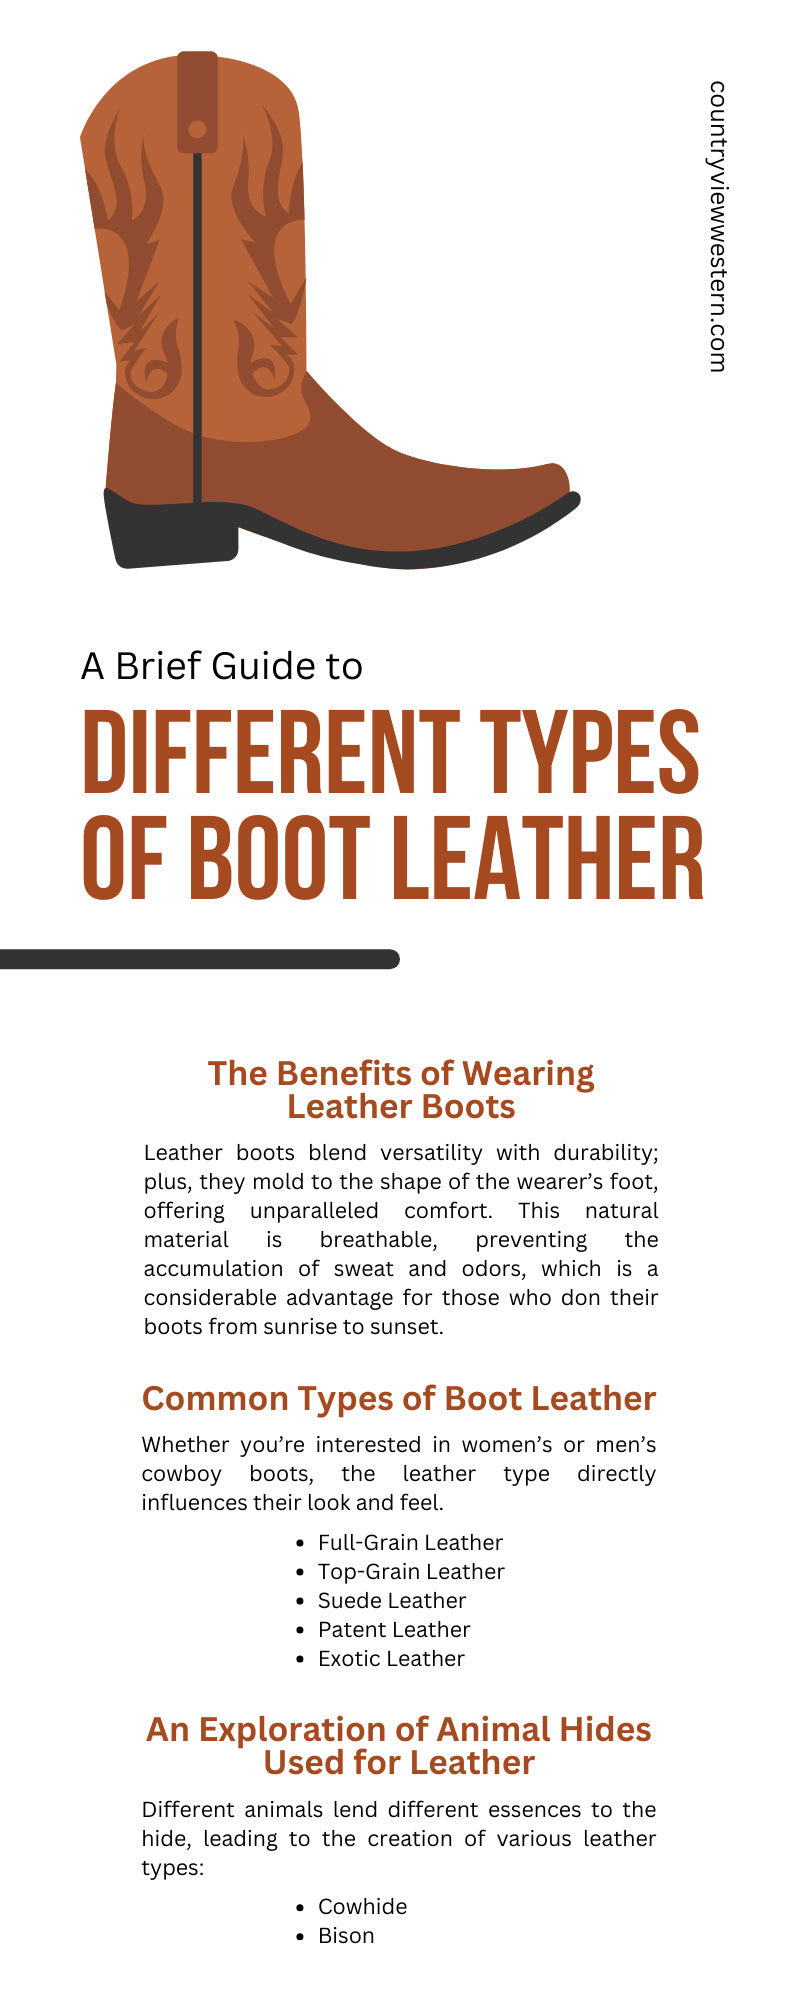 A Brief Guide to Different Types of Boot Leather